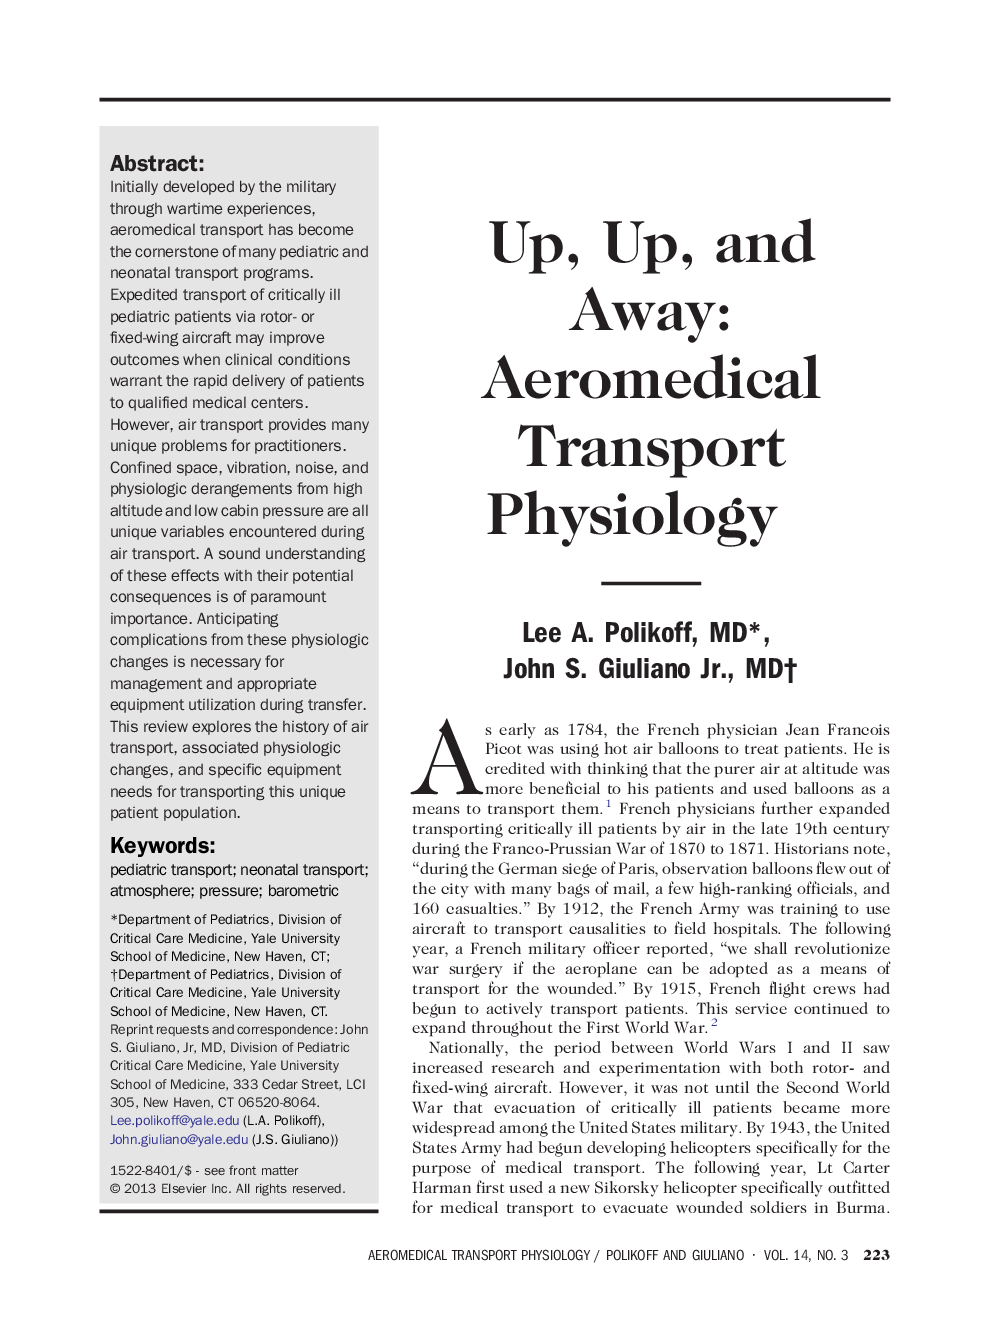 Up, Up, and Away: Aeromedical Transport Physiology 